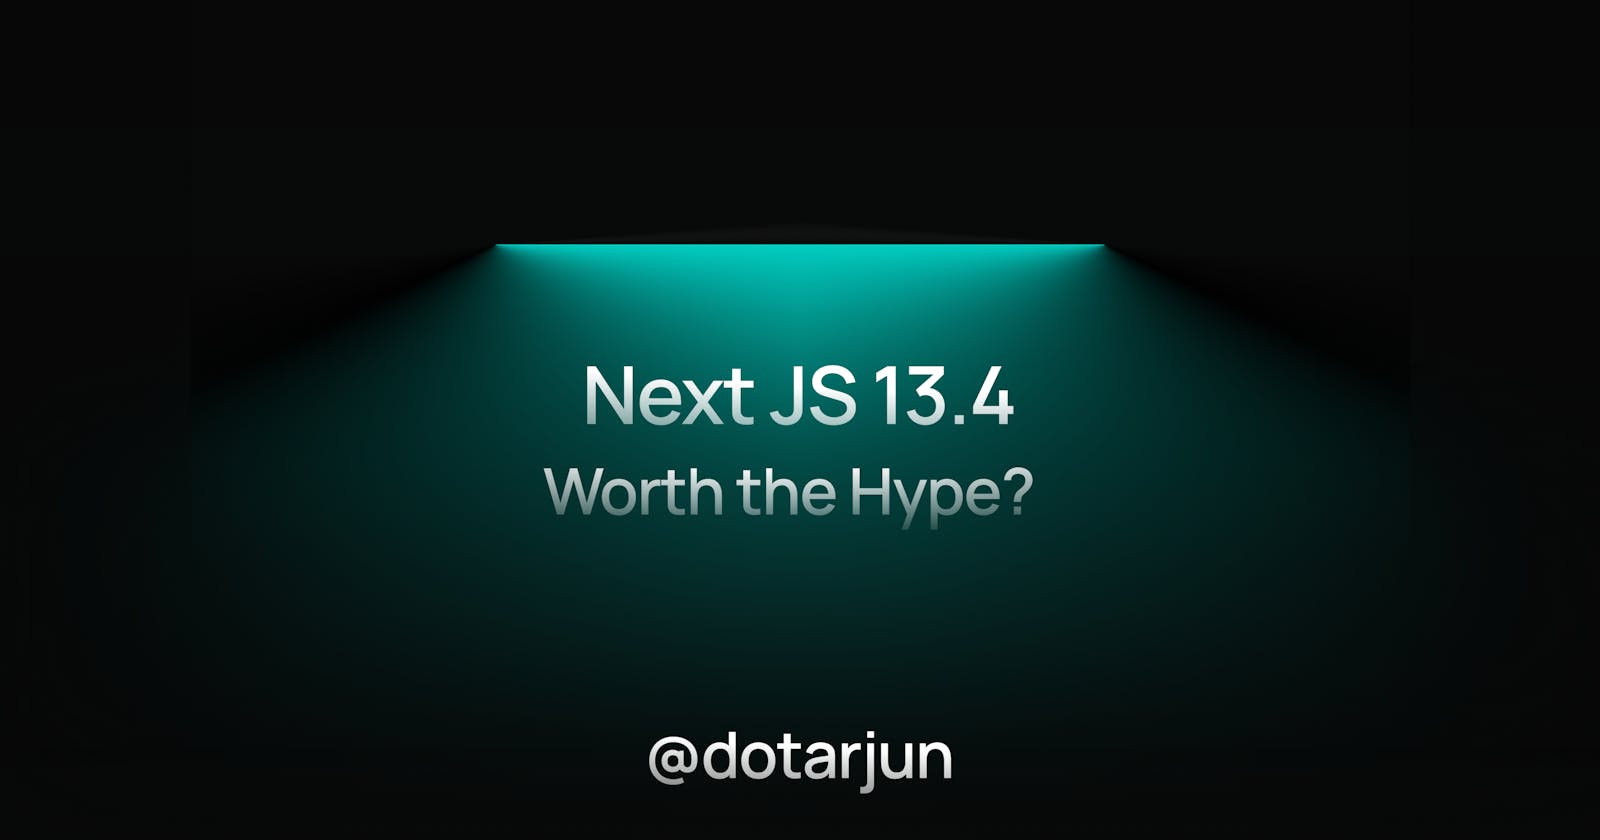 Next.js 13.4 - Install NOW or Risk Falling Behind Your Competition?